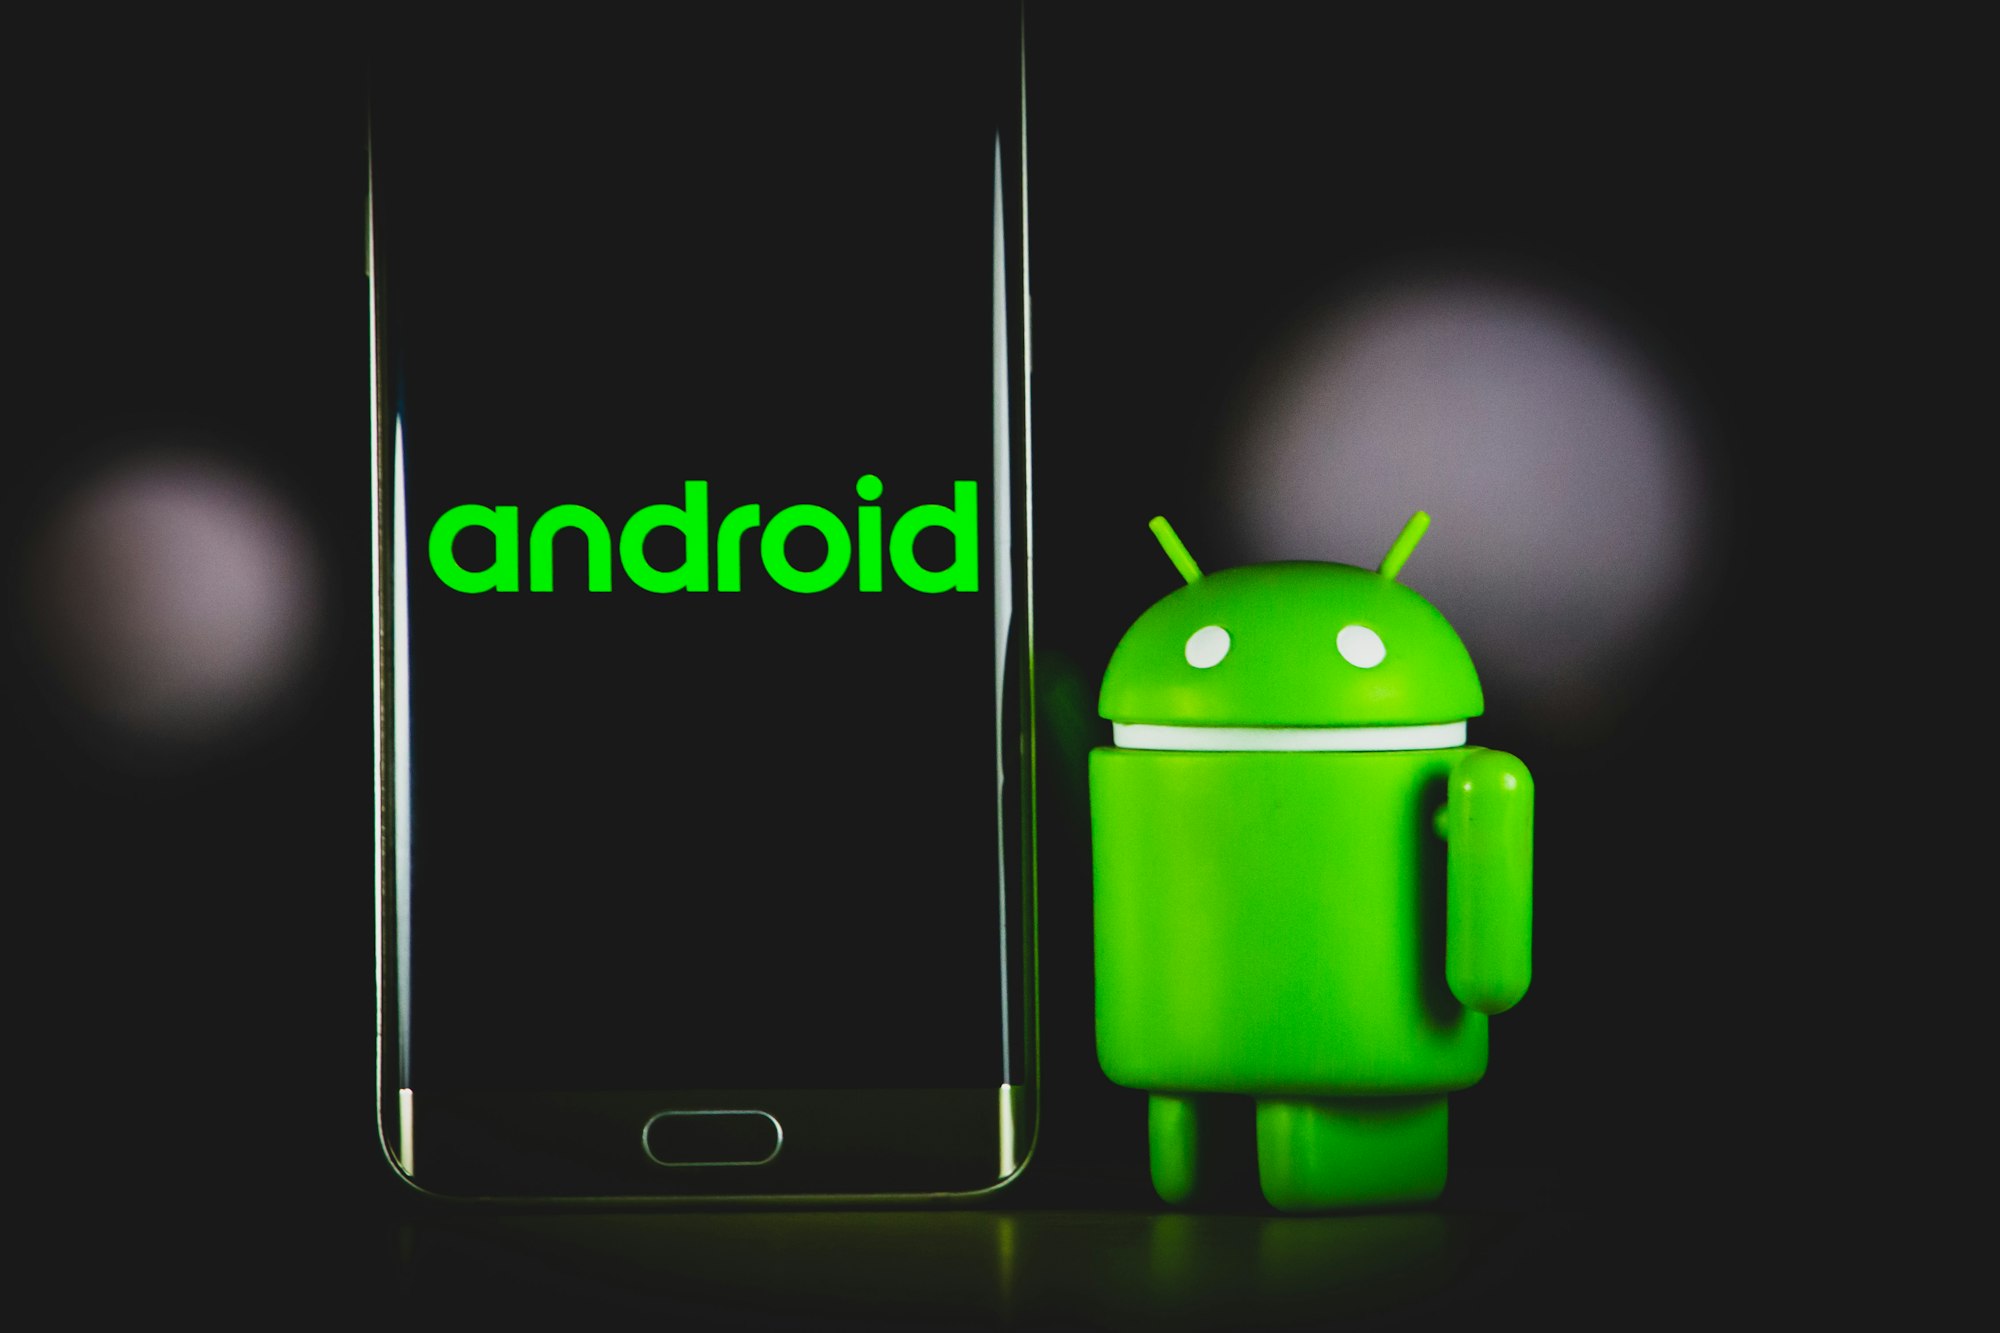 How To Change the OS on An Android Phone